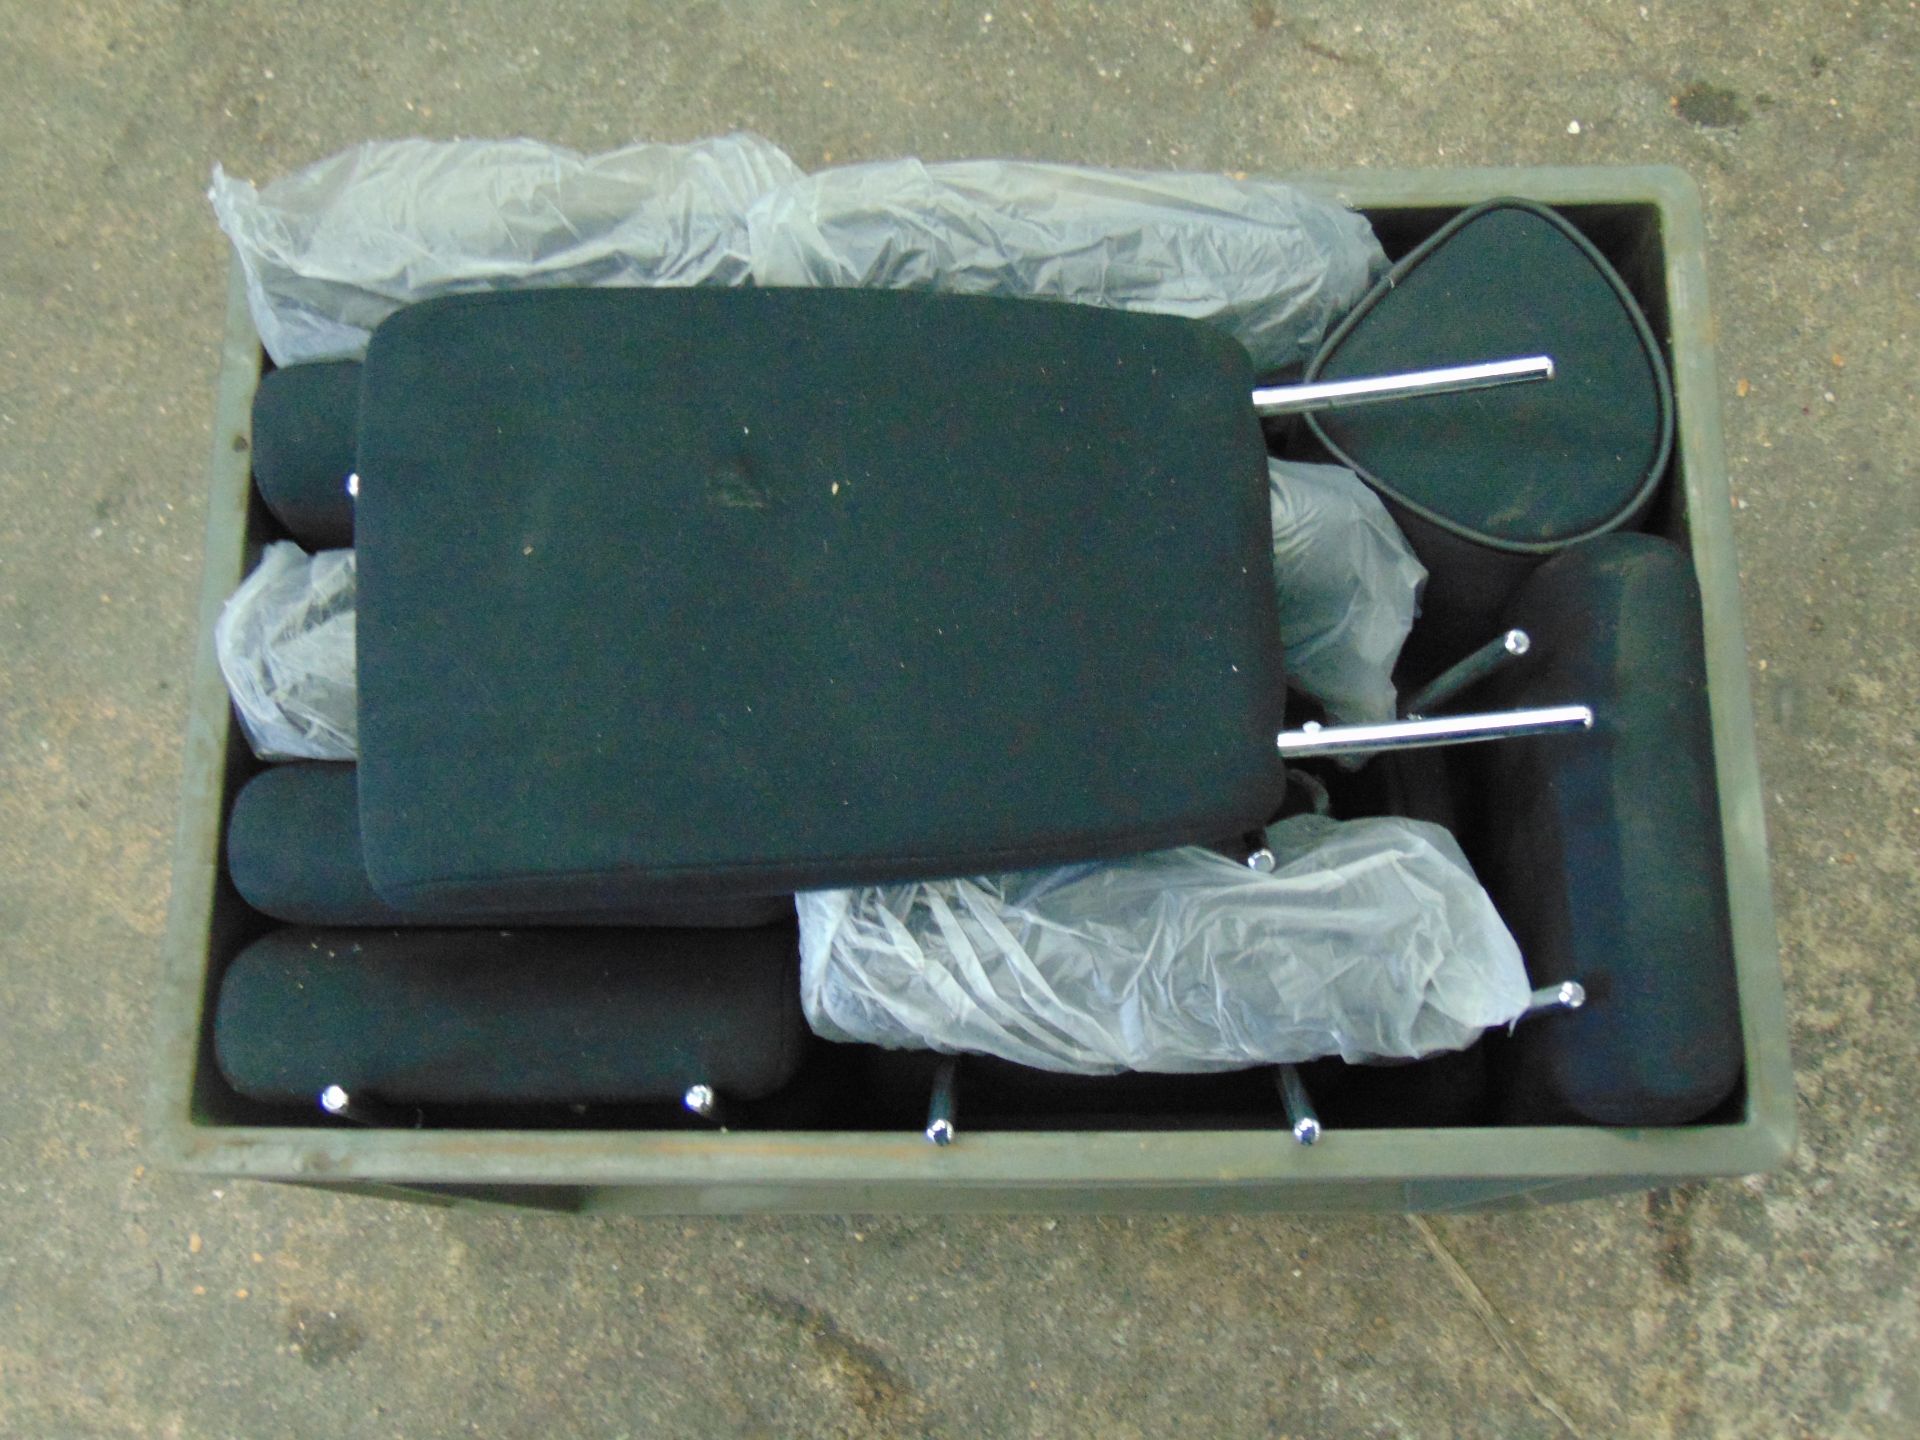 Mixed Stillage of Mitsubishi Bench Seats and Head Rests - Image 5 of 6